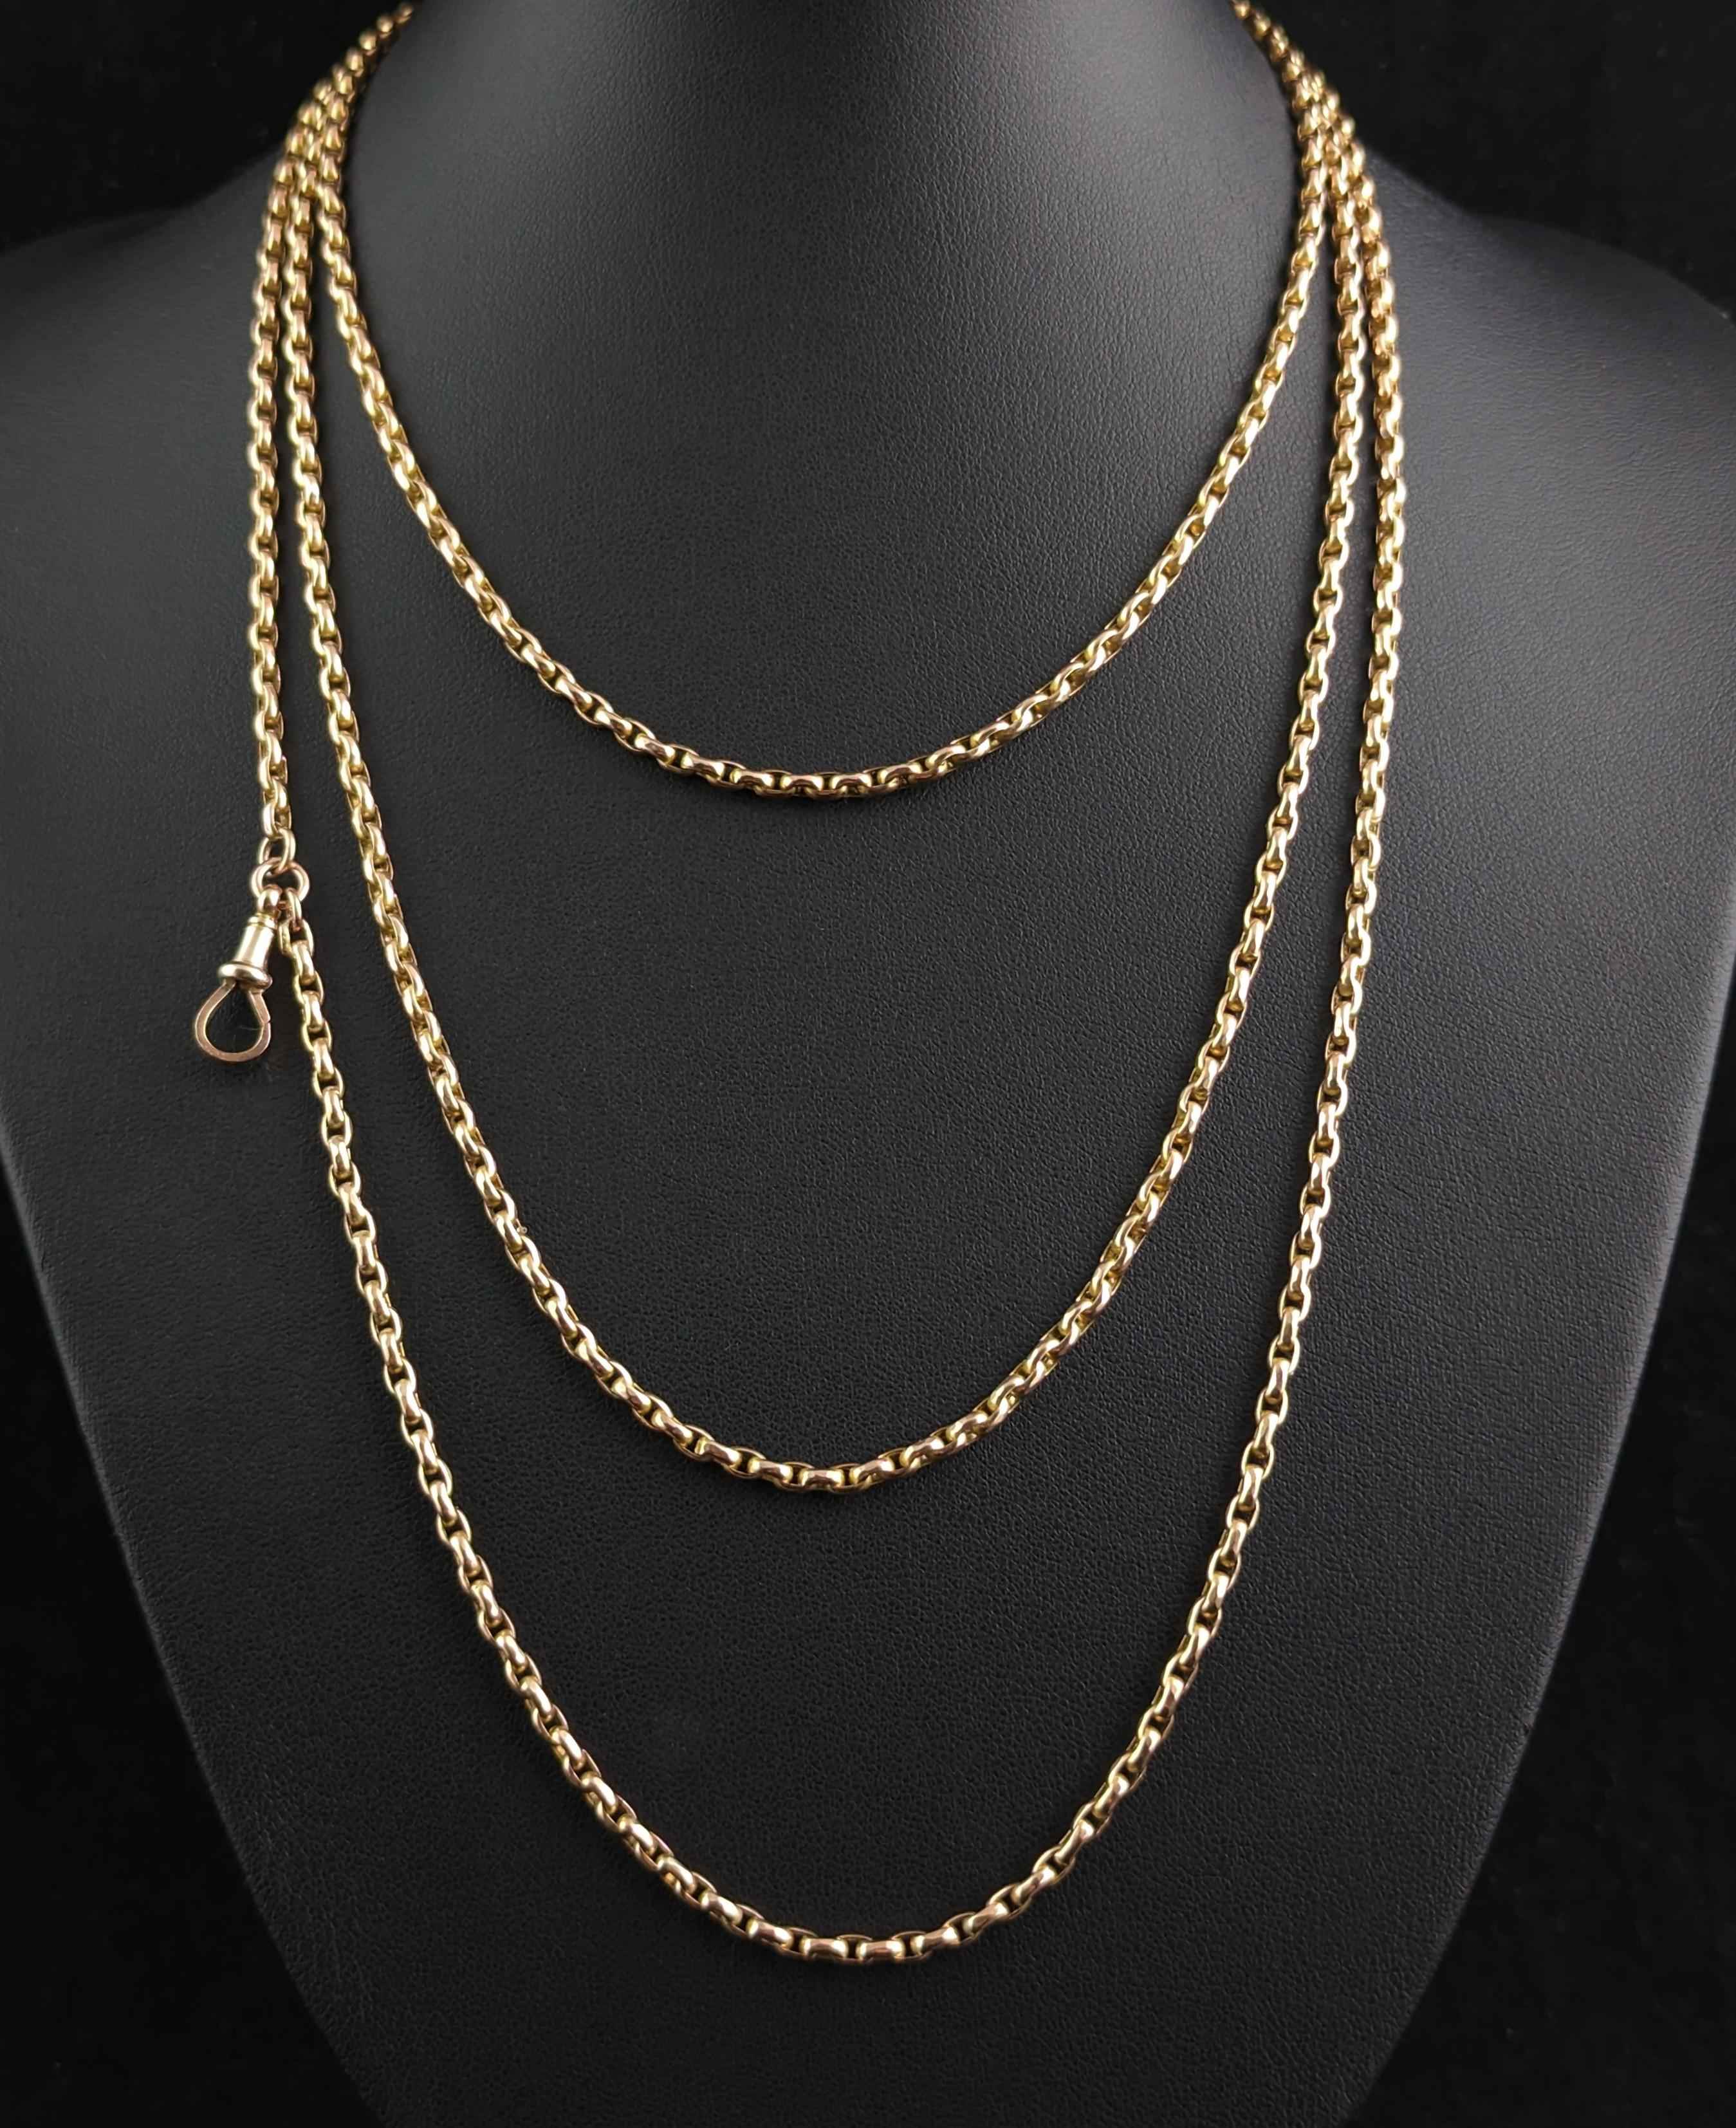 This stunning antique, Victorian 9kt yellow gold longuard chain is sure to turn some heads.

We love a good longuard chain here, such a versatile and wearable piece of jewellery, this one is no exception.

Attractive rectangular belcher or rolo